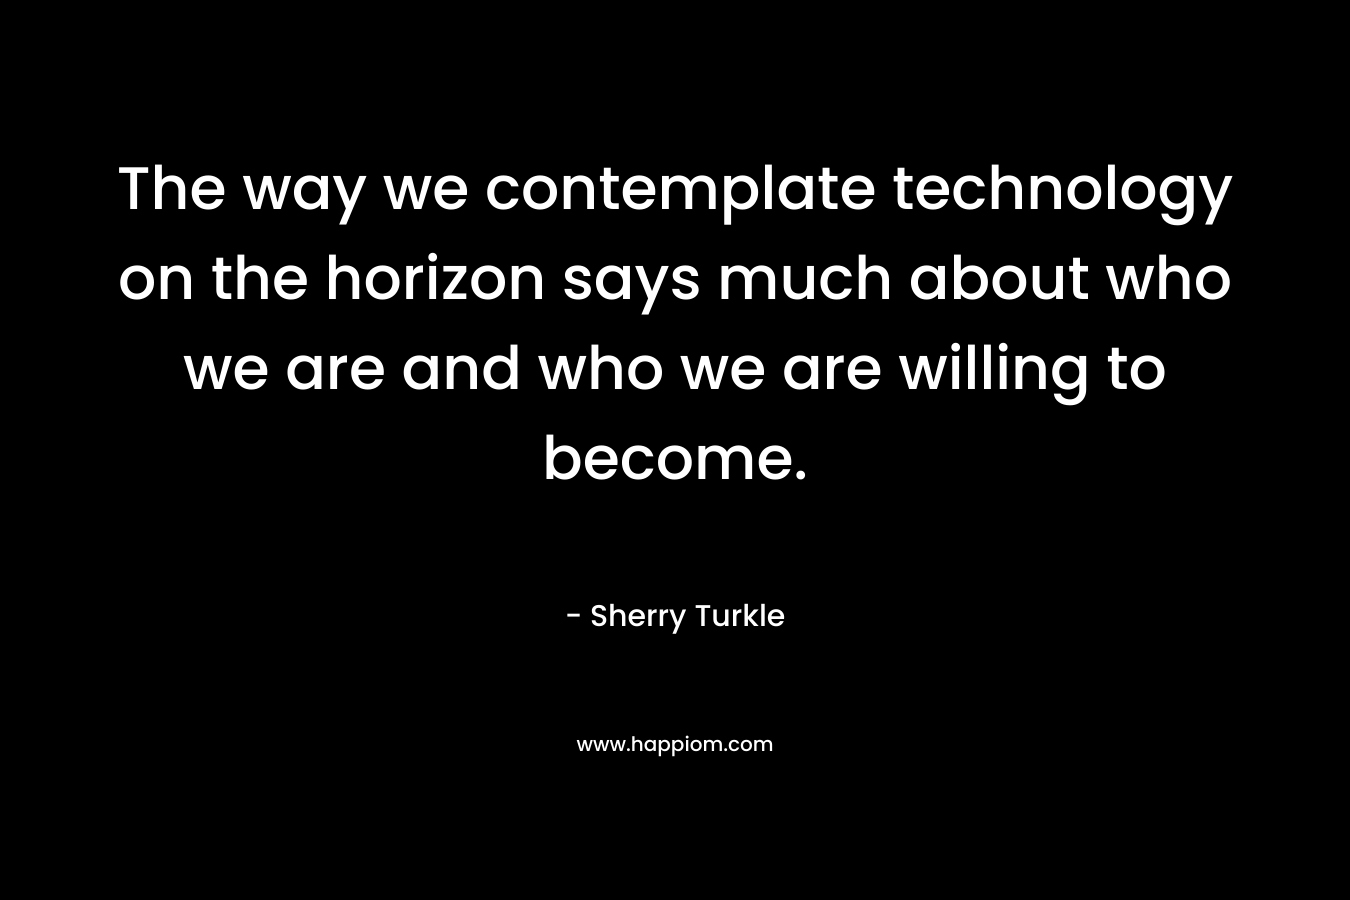 The way we contemplate technology on the horizon says much about who we are and who we are willing to become.